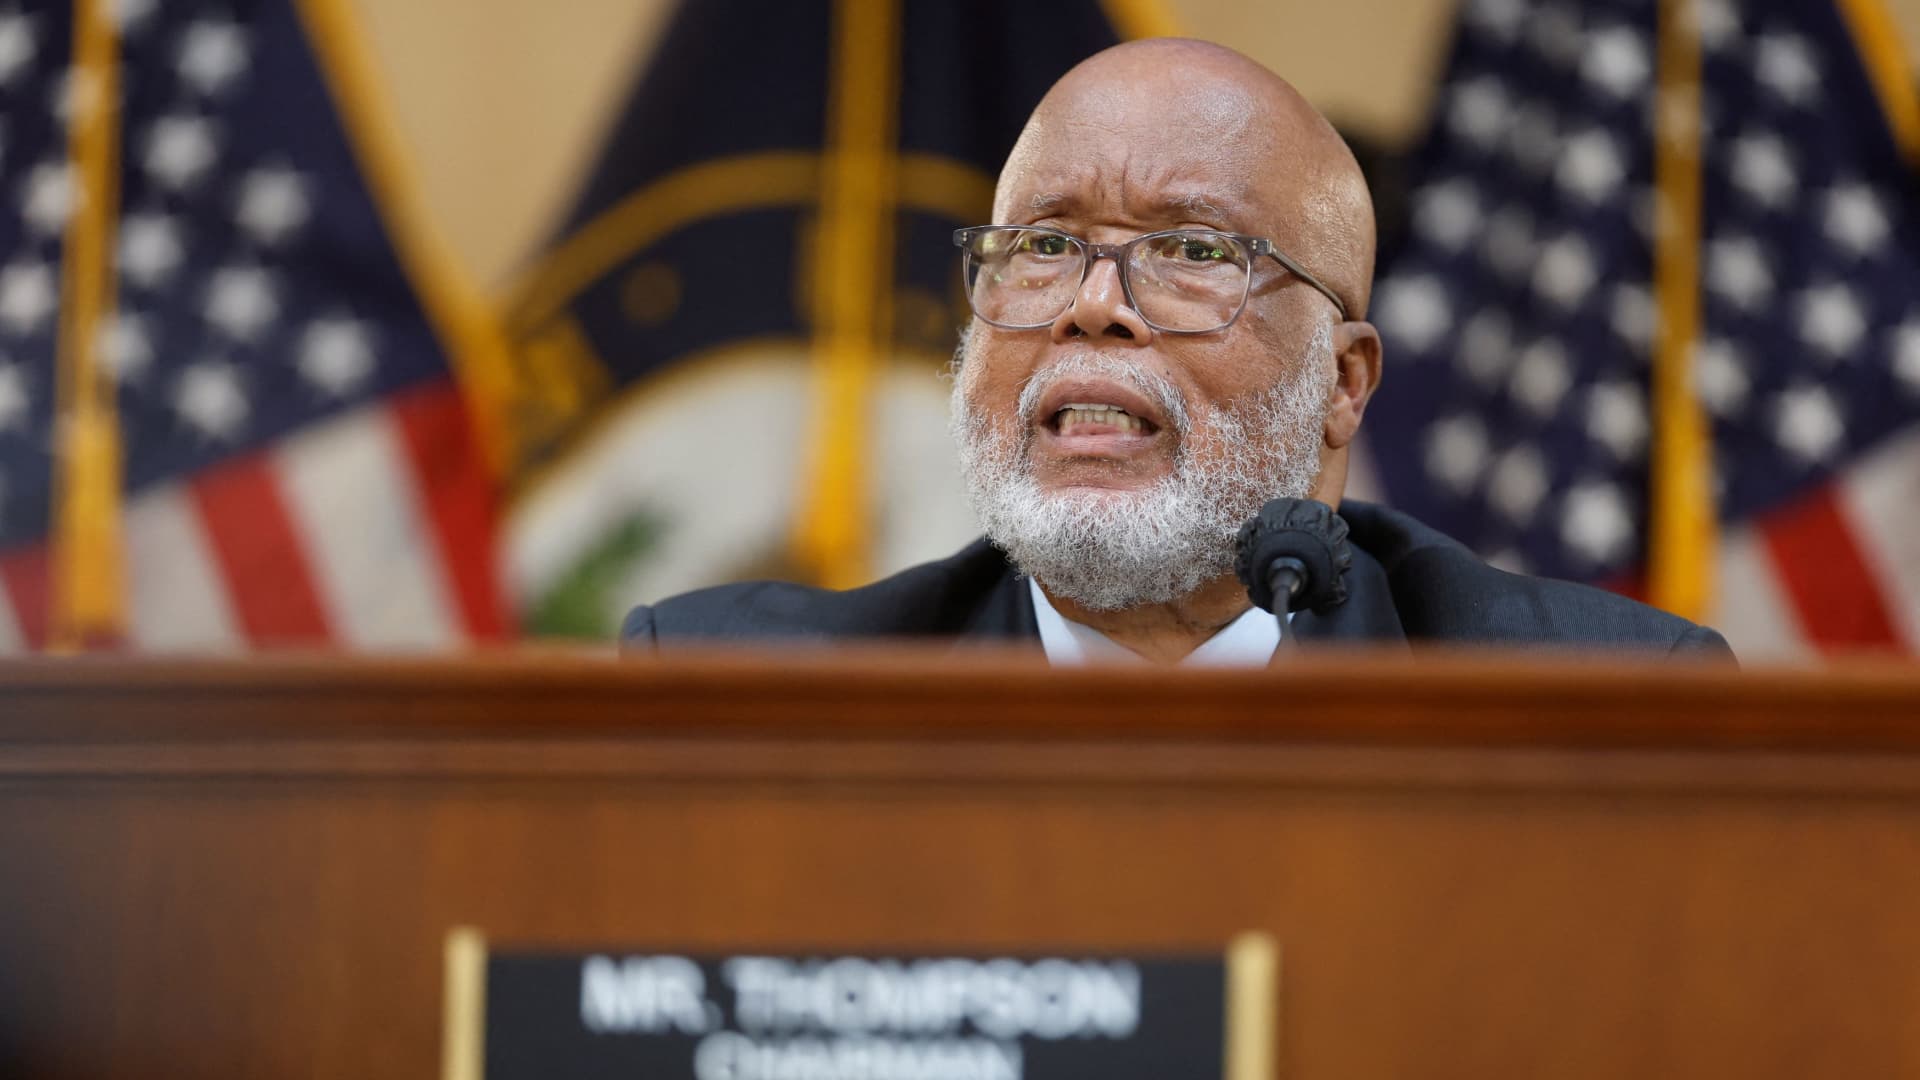 Chairman U.S. Representative Bennie Thompson (D-MS) speaks during in the opening public hearing of the U.S. House Select Committee to Investigate the January 6 Attack on the United States Capitol, on Capitol Hill in Washington, U.S., June 9, 2022.